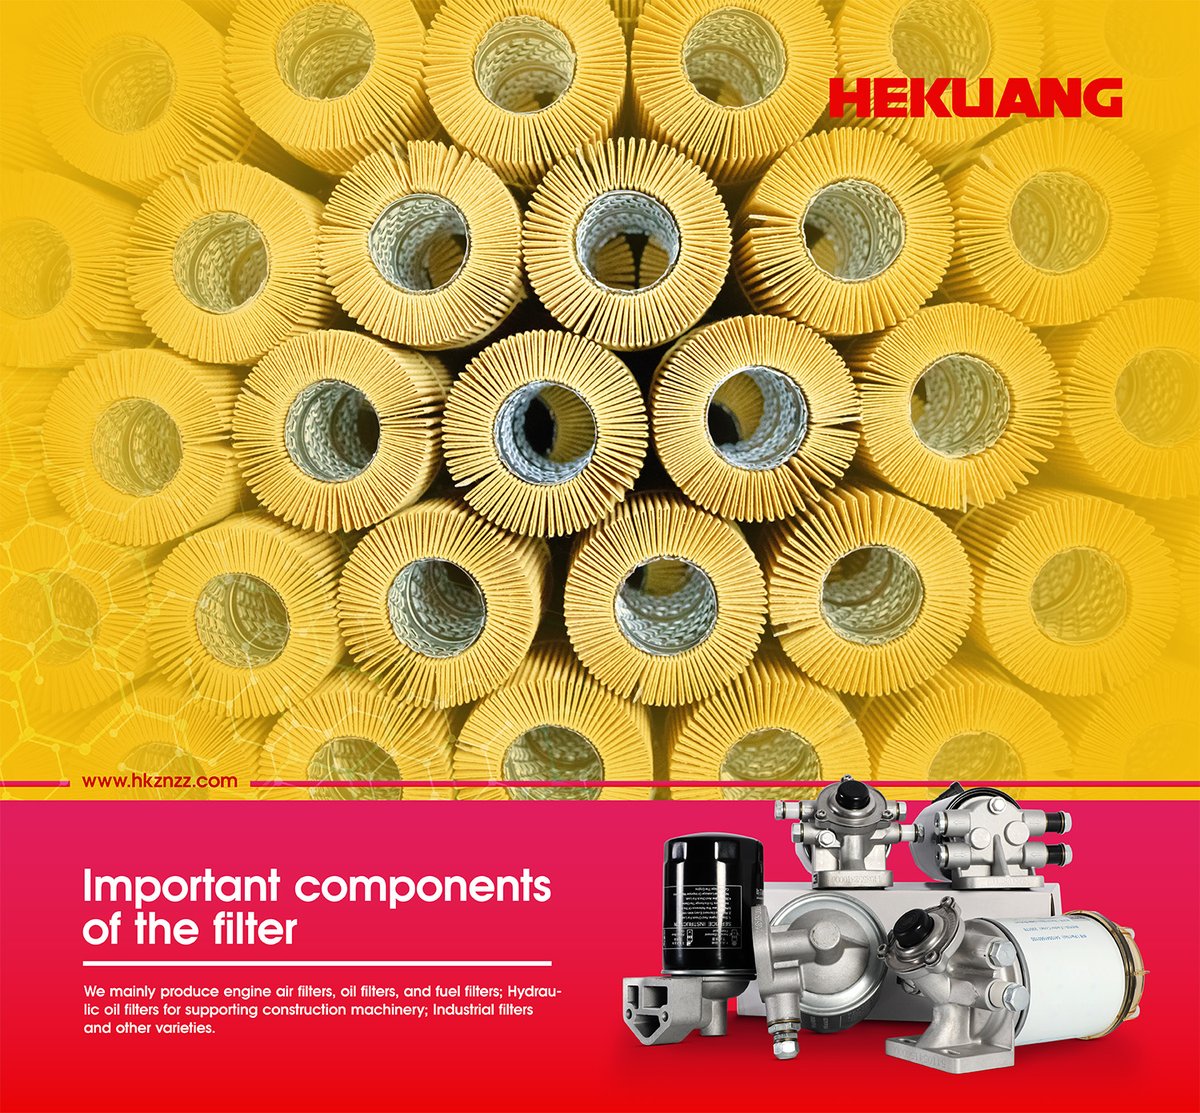 HEKUANG oil filters are equipped with professional filter papers sourced from  HV & Osung , ensuring top-notch filtration performance. Safeguard your machinery from impurities and contaminants—choose trusted filter papers to guarantee clear and pure oil liquids! #OilFilters